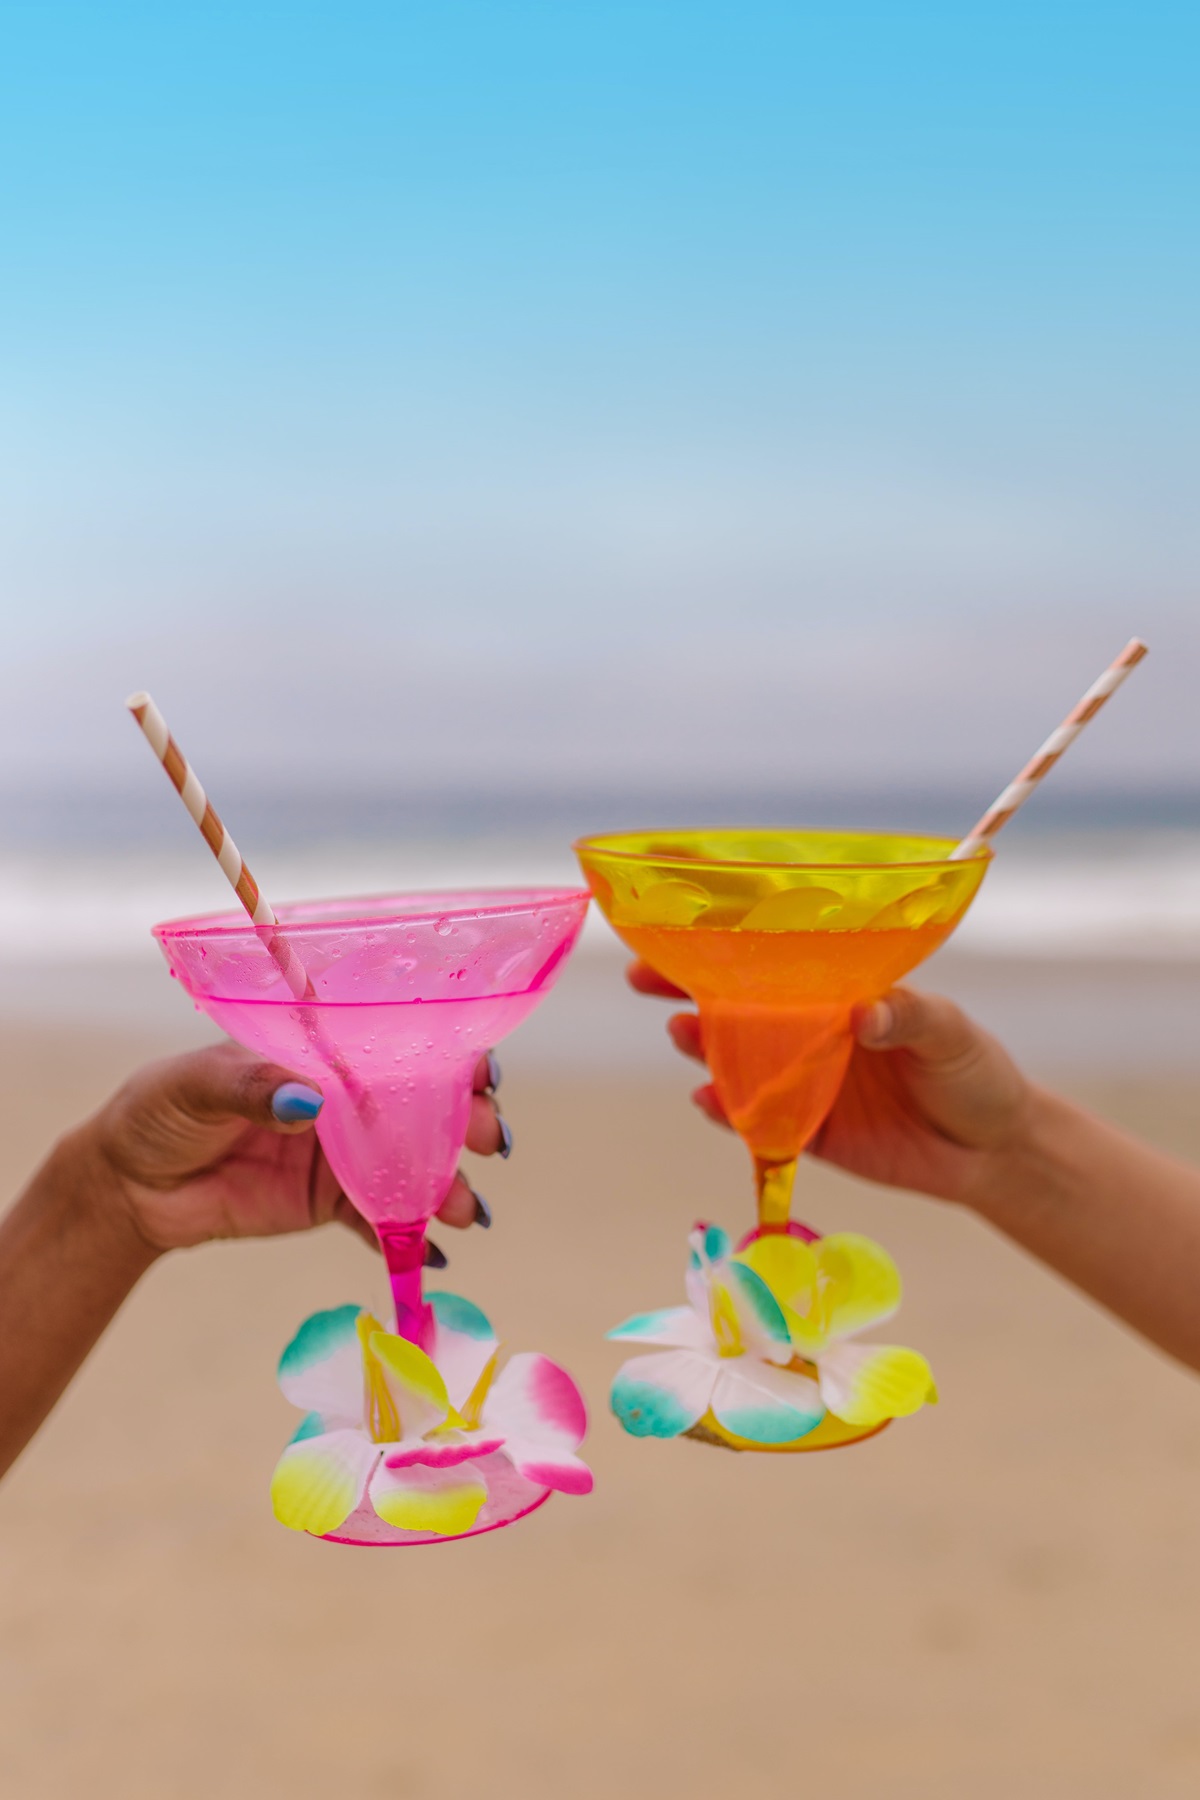 Planning A Beach Getaway For New Year’s? These Cocktails Have The Perfect Vibe